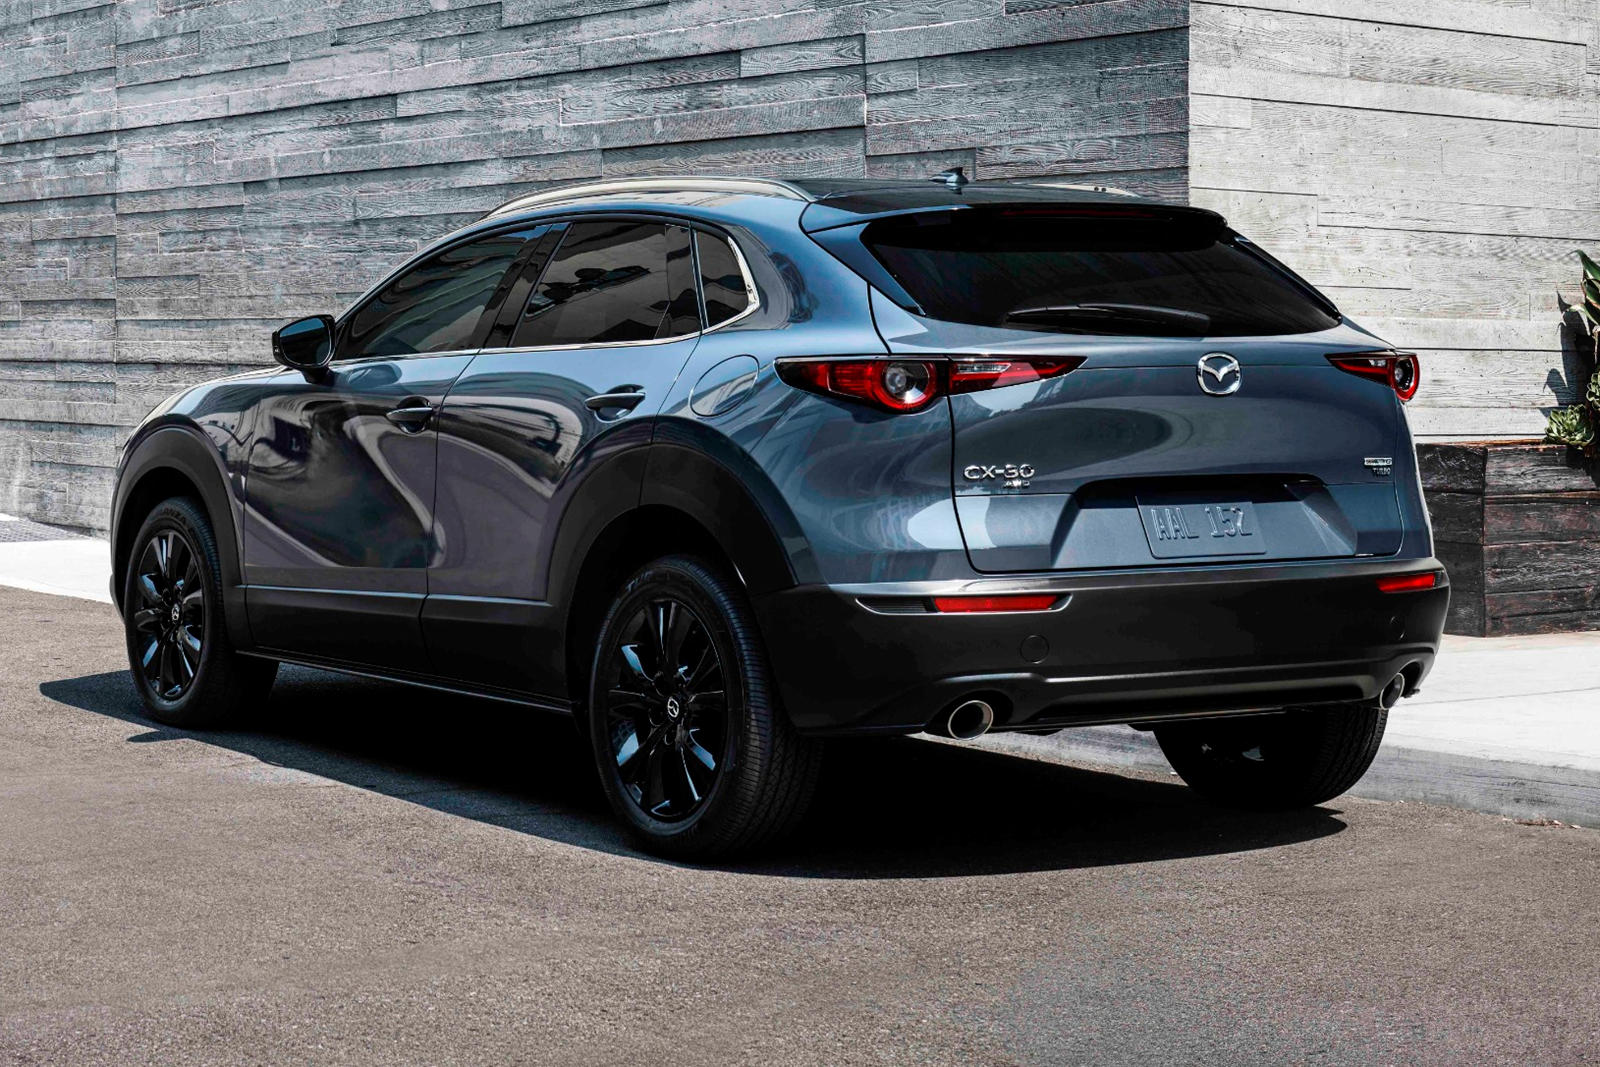 2021 Mazda CX30 2.5 Turbo Costs Less Than The 3 Hatchback